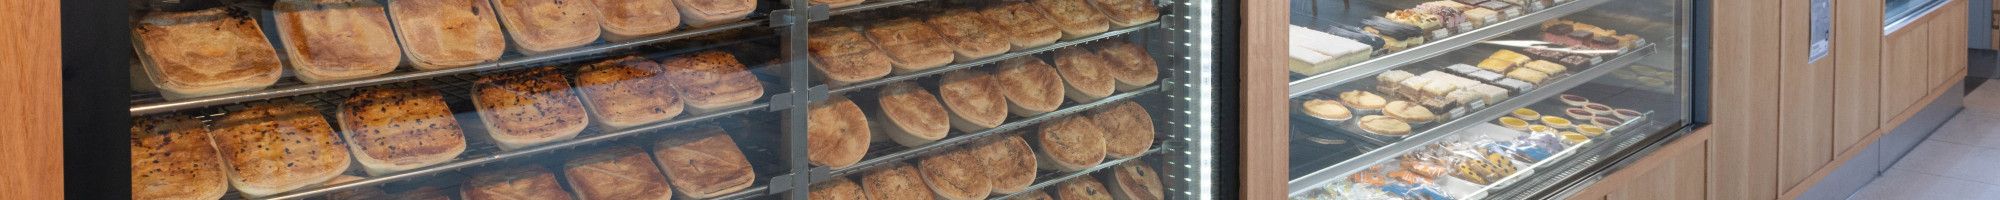 Pies and pasties in a bakery